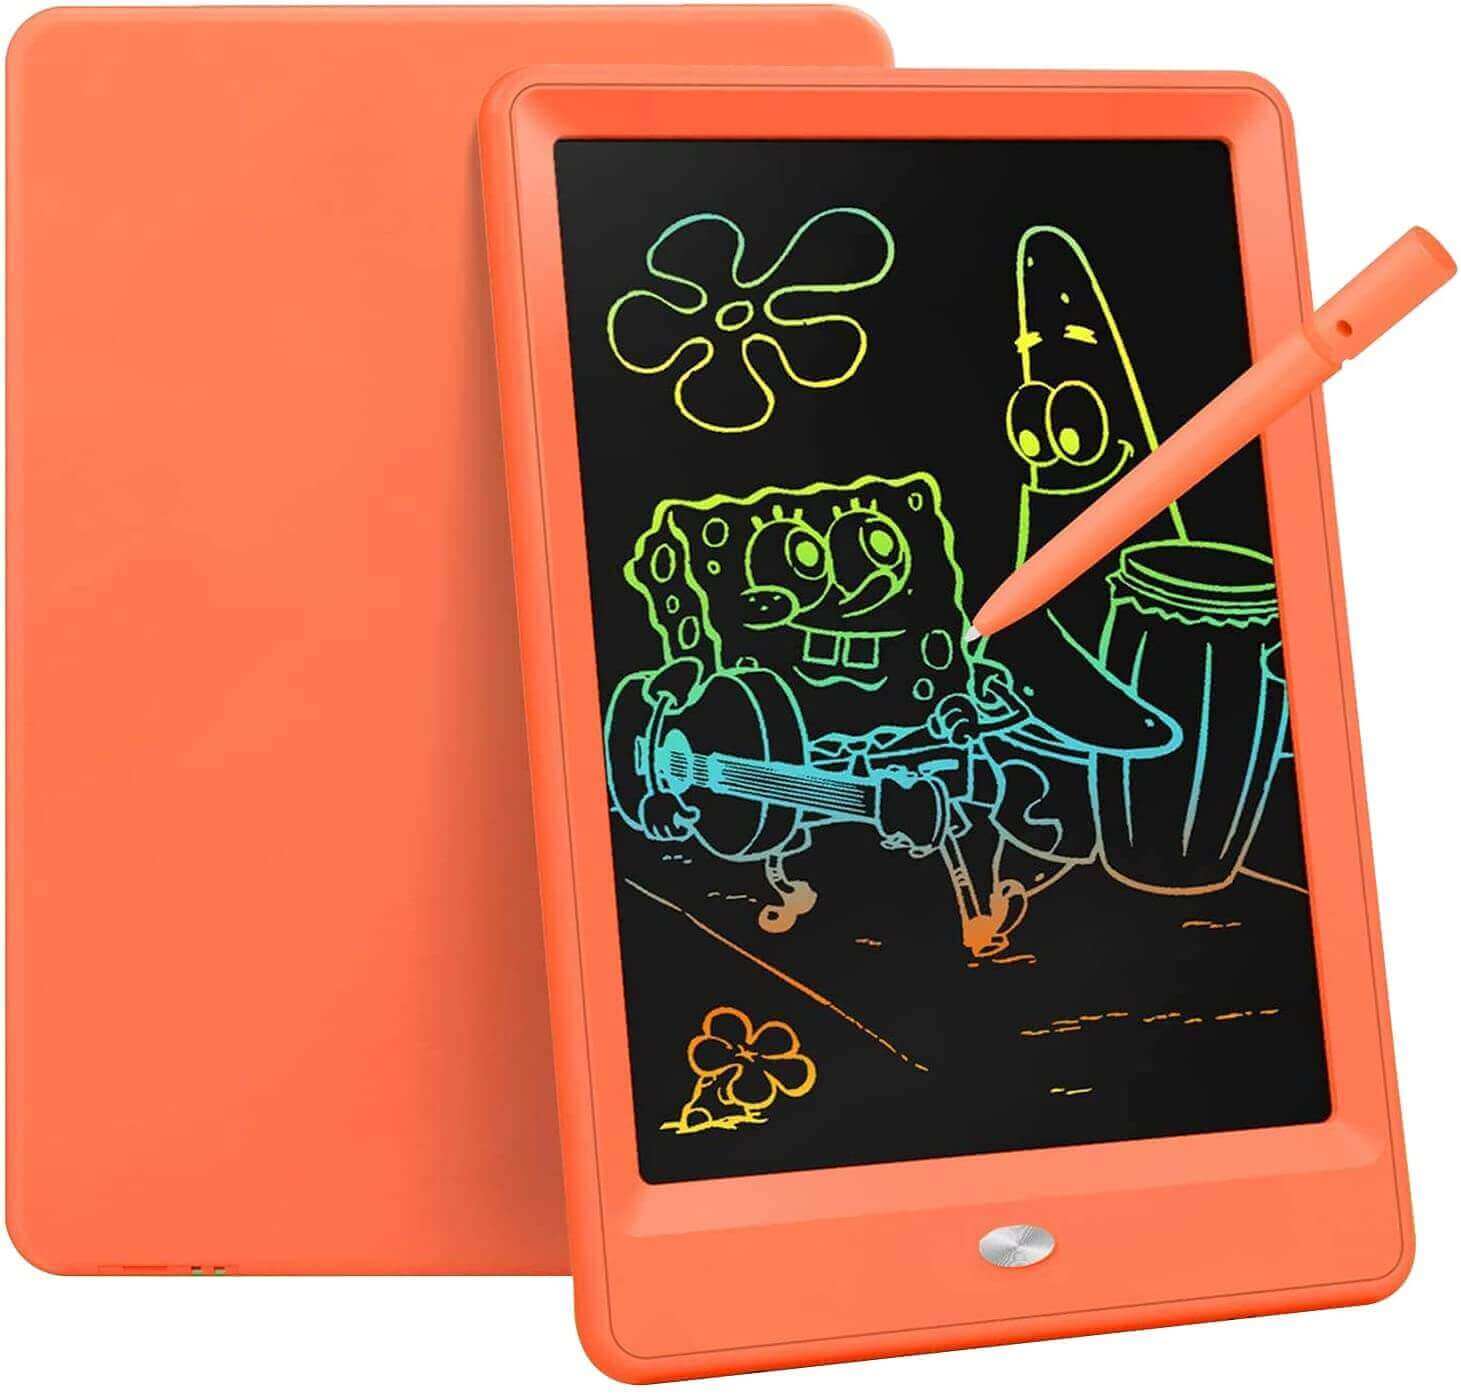 LCD Drawing Tablet – Lil'Playground